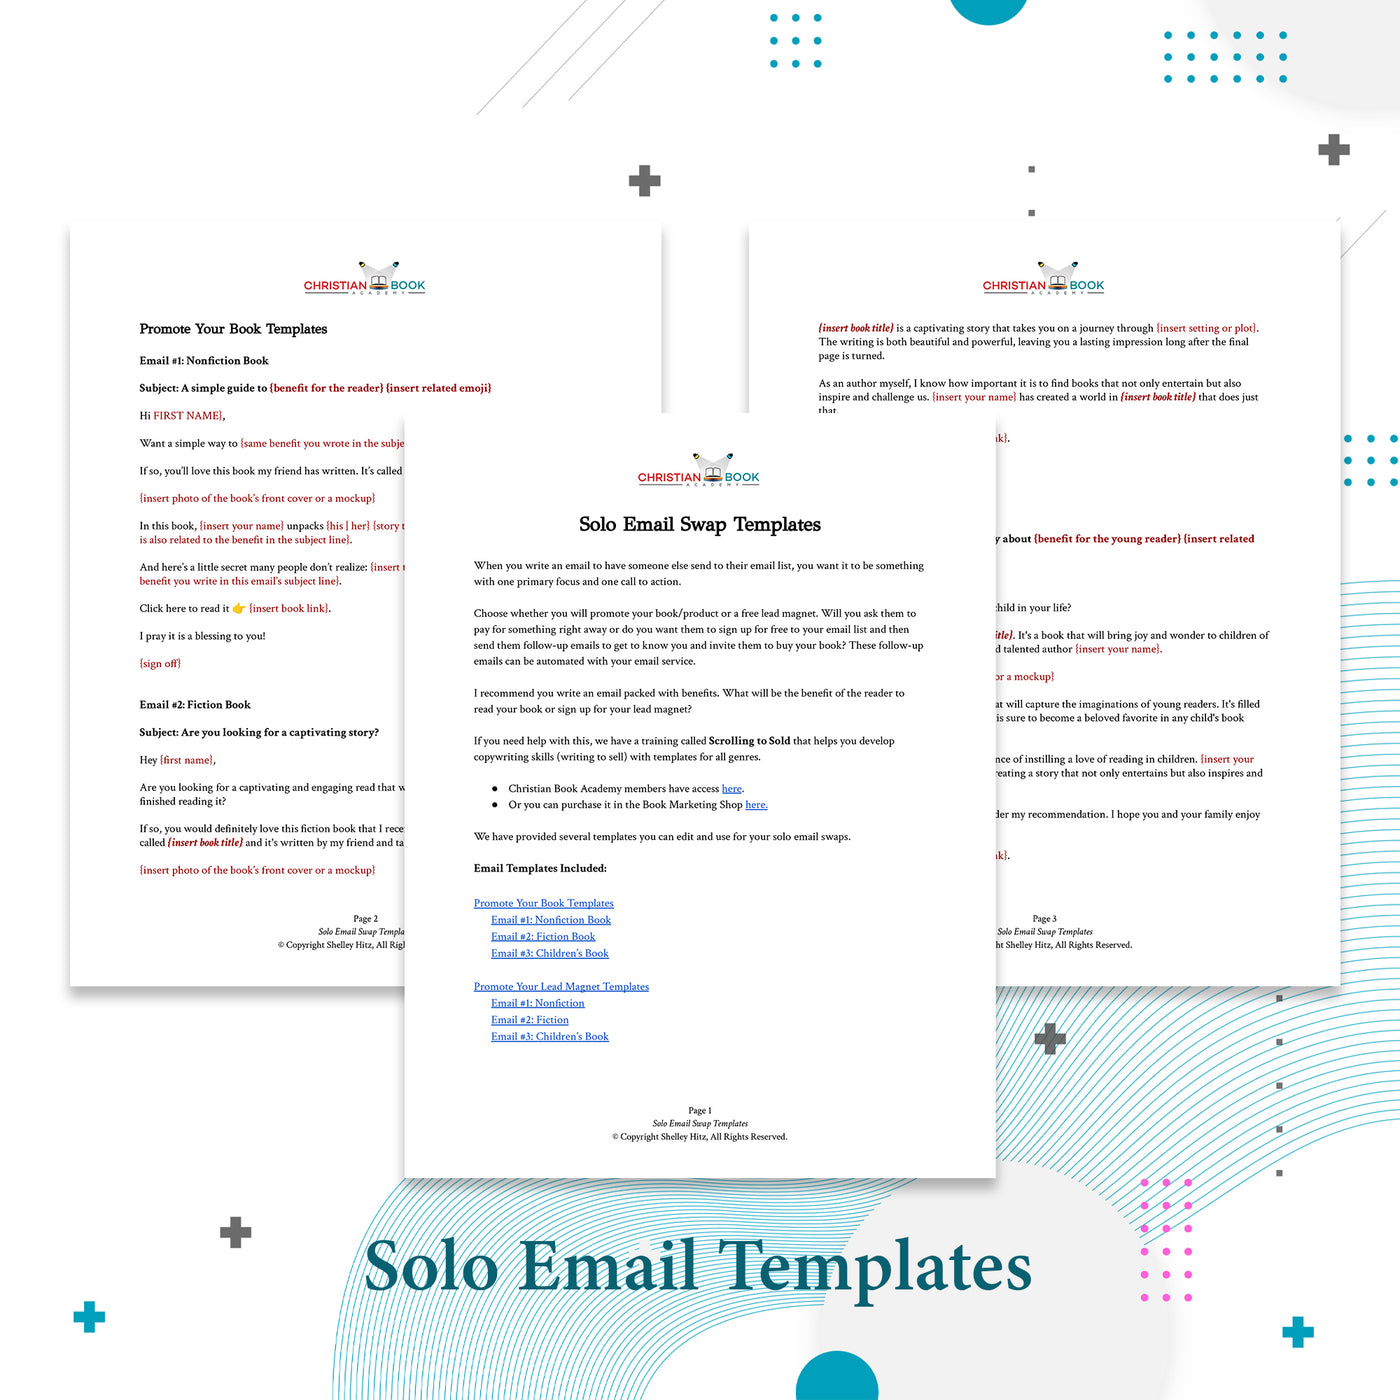 Solo Email Swaps Toolkit